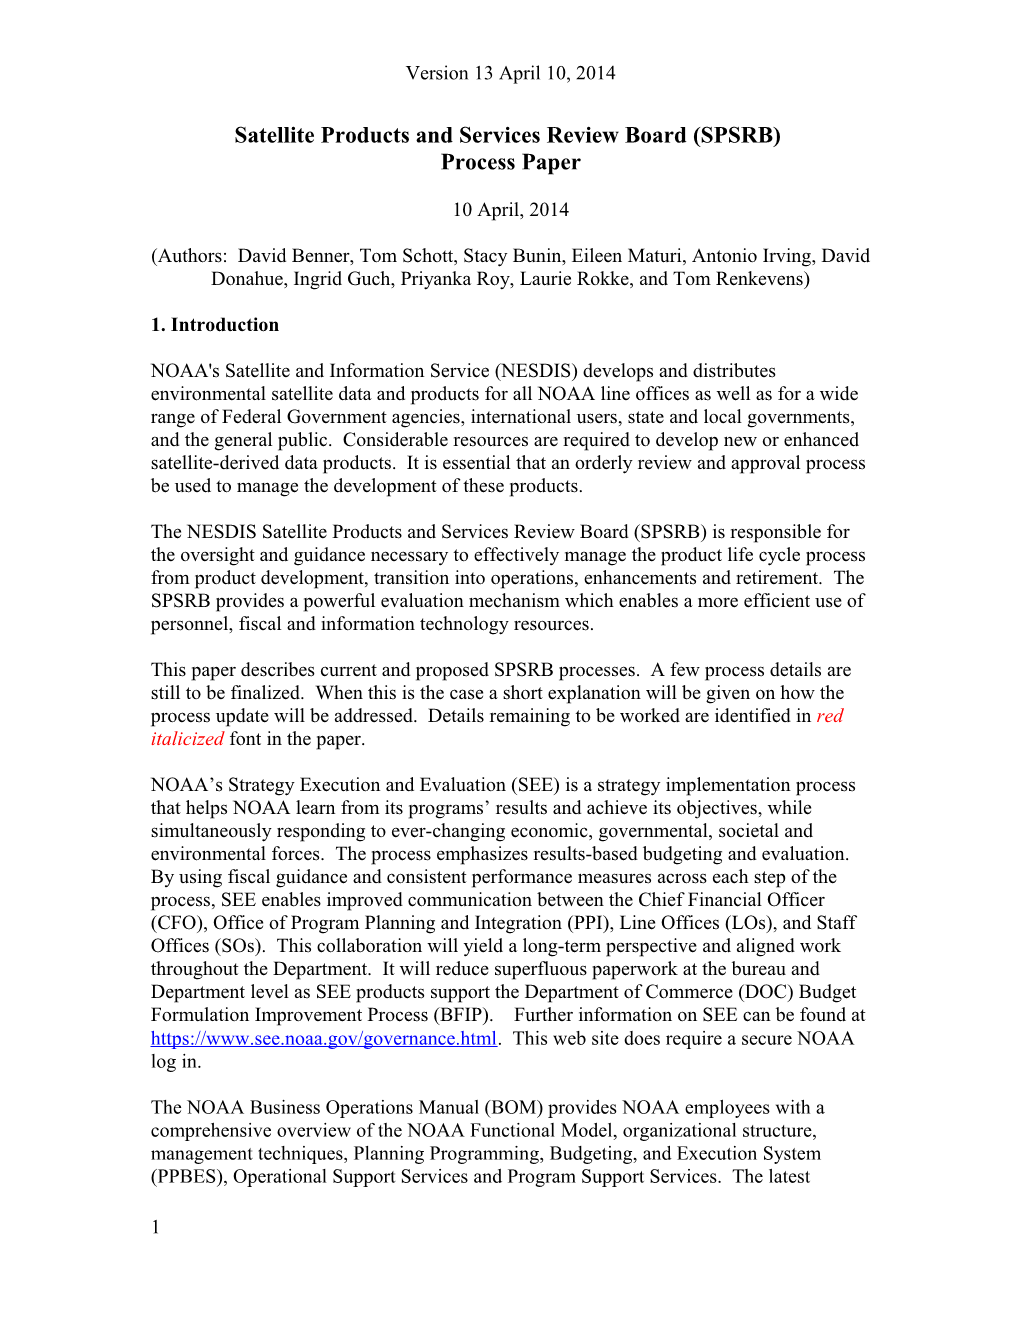 Satellite Products and Services Review Board (SPSRB)